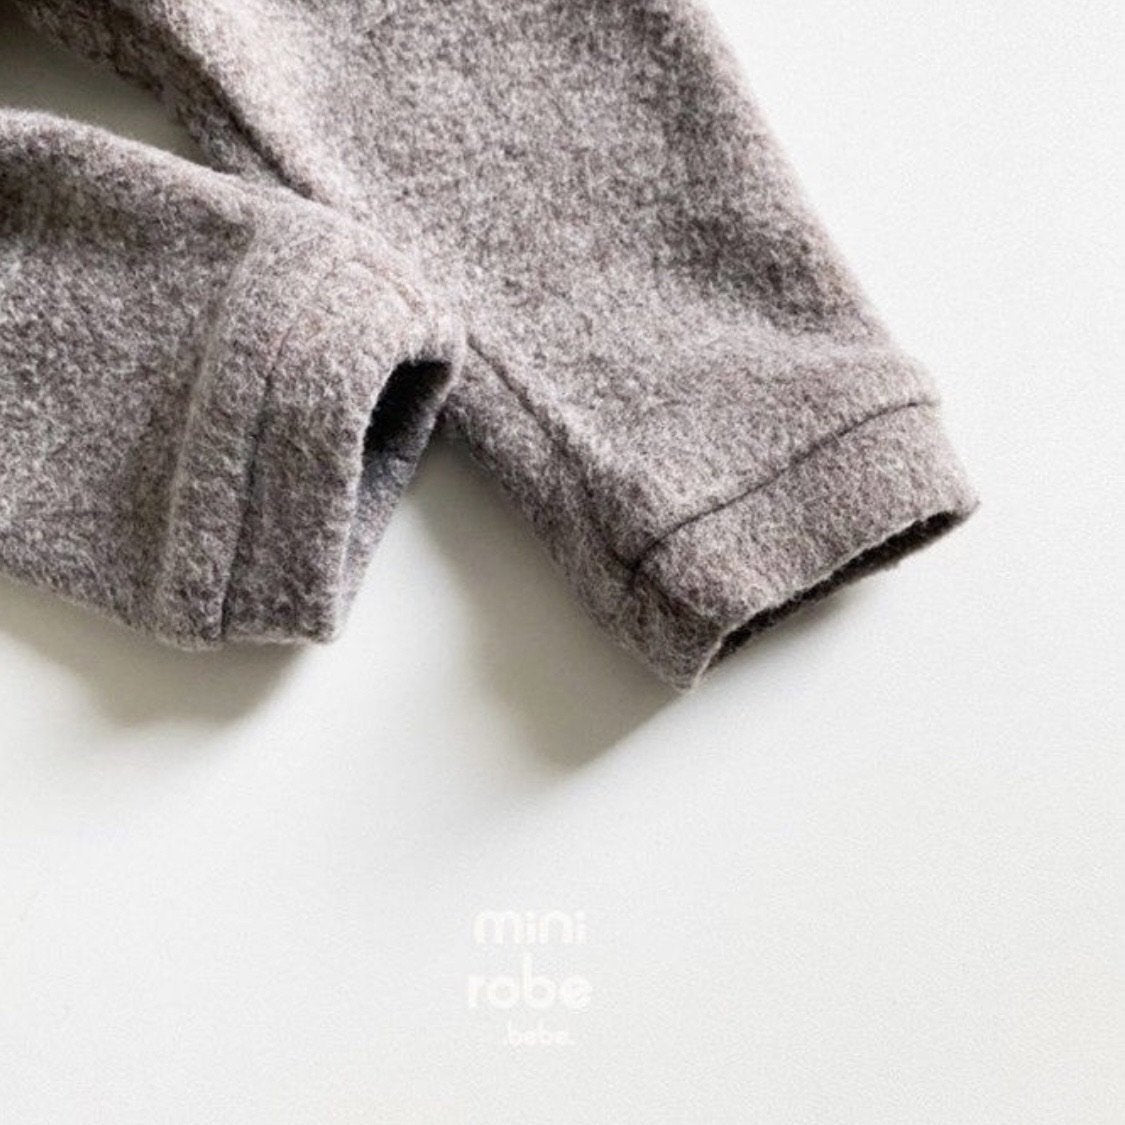 Mini Jogger Hose Pants find Stylish Fashion for Little People- at Little Foxx Concept Store